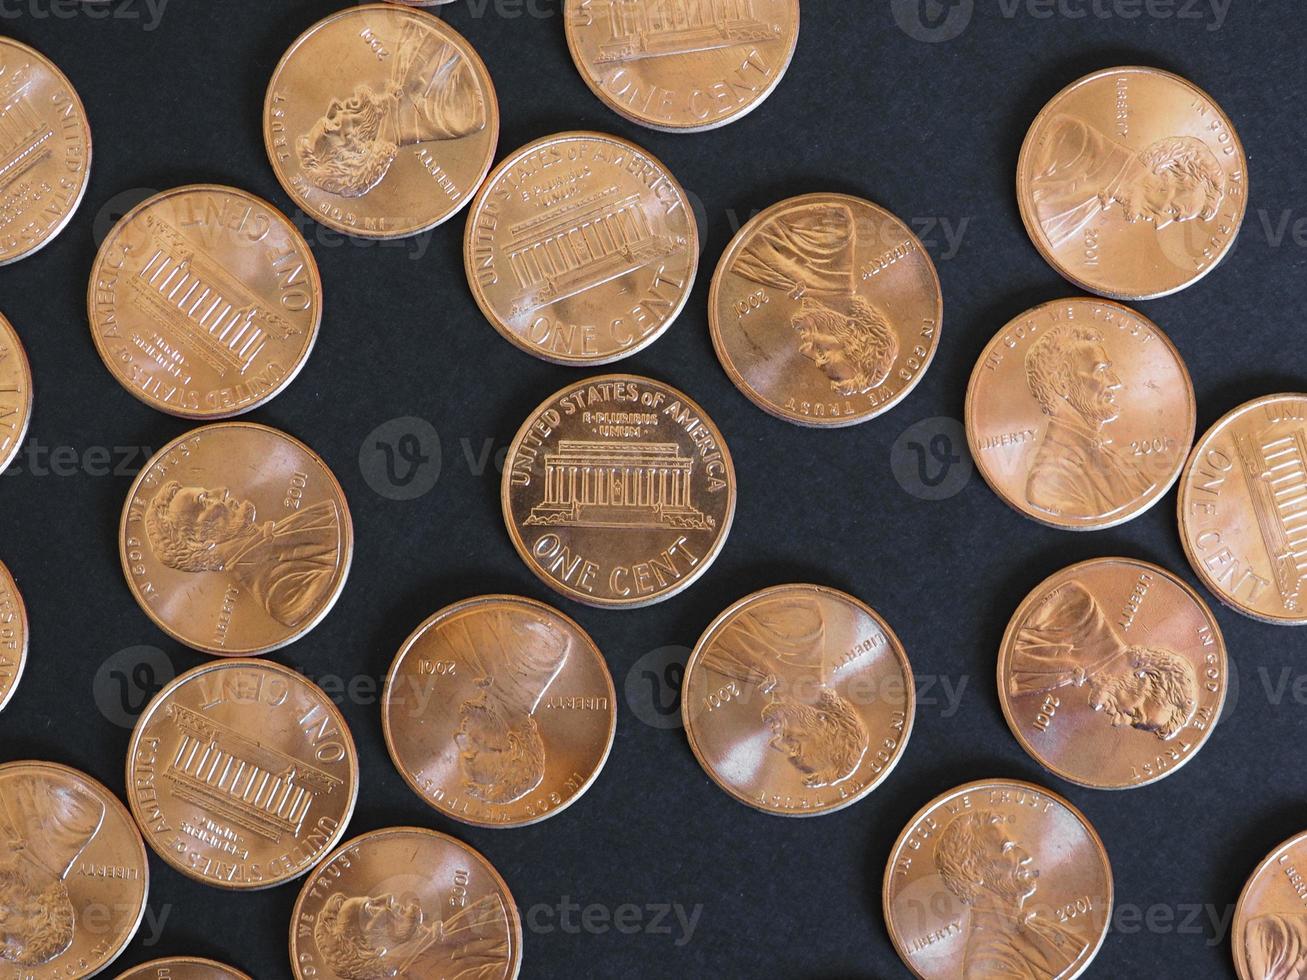 One Cent Dollar coins, United States over black photo